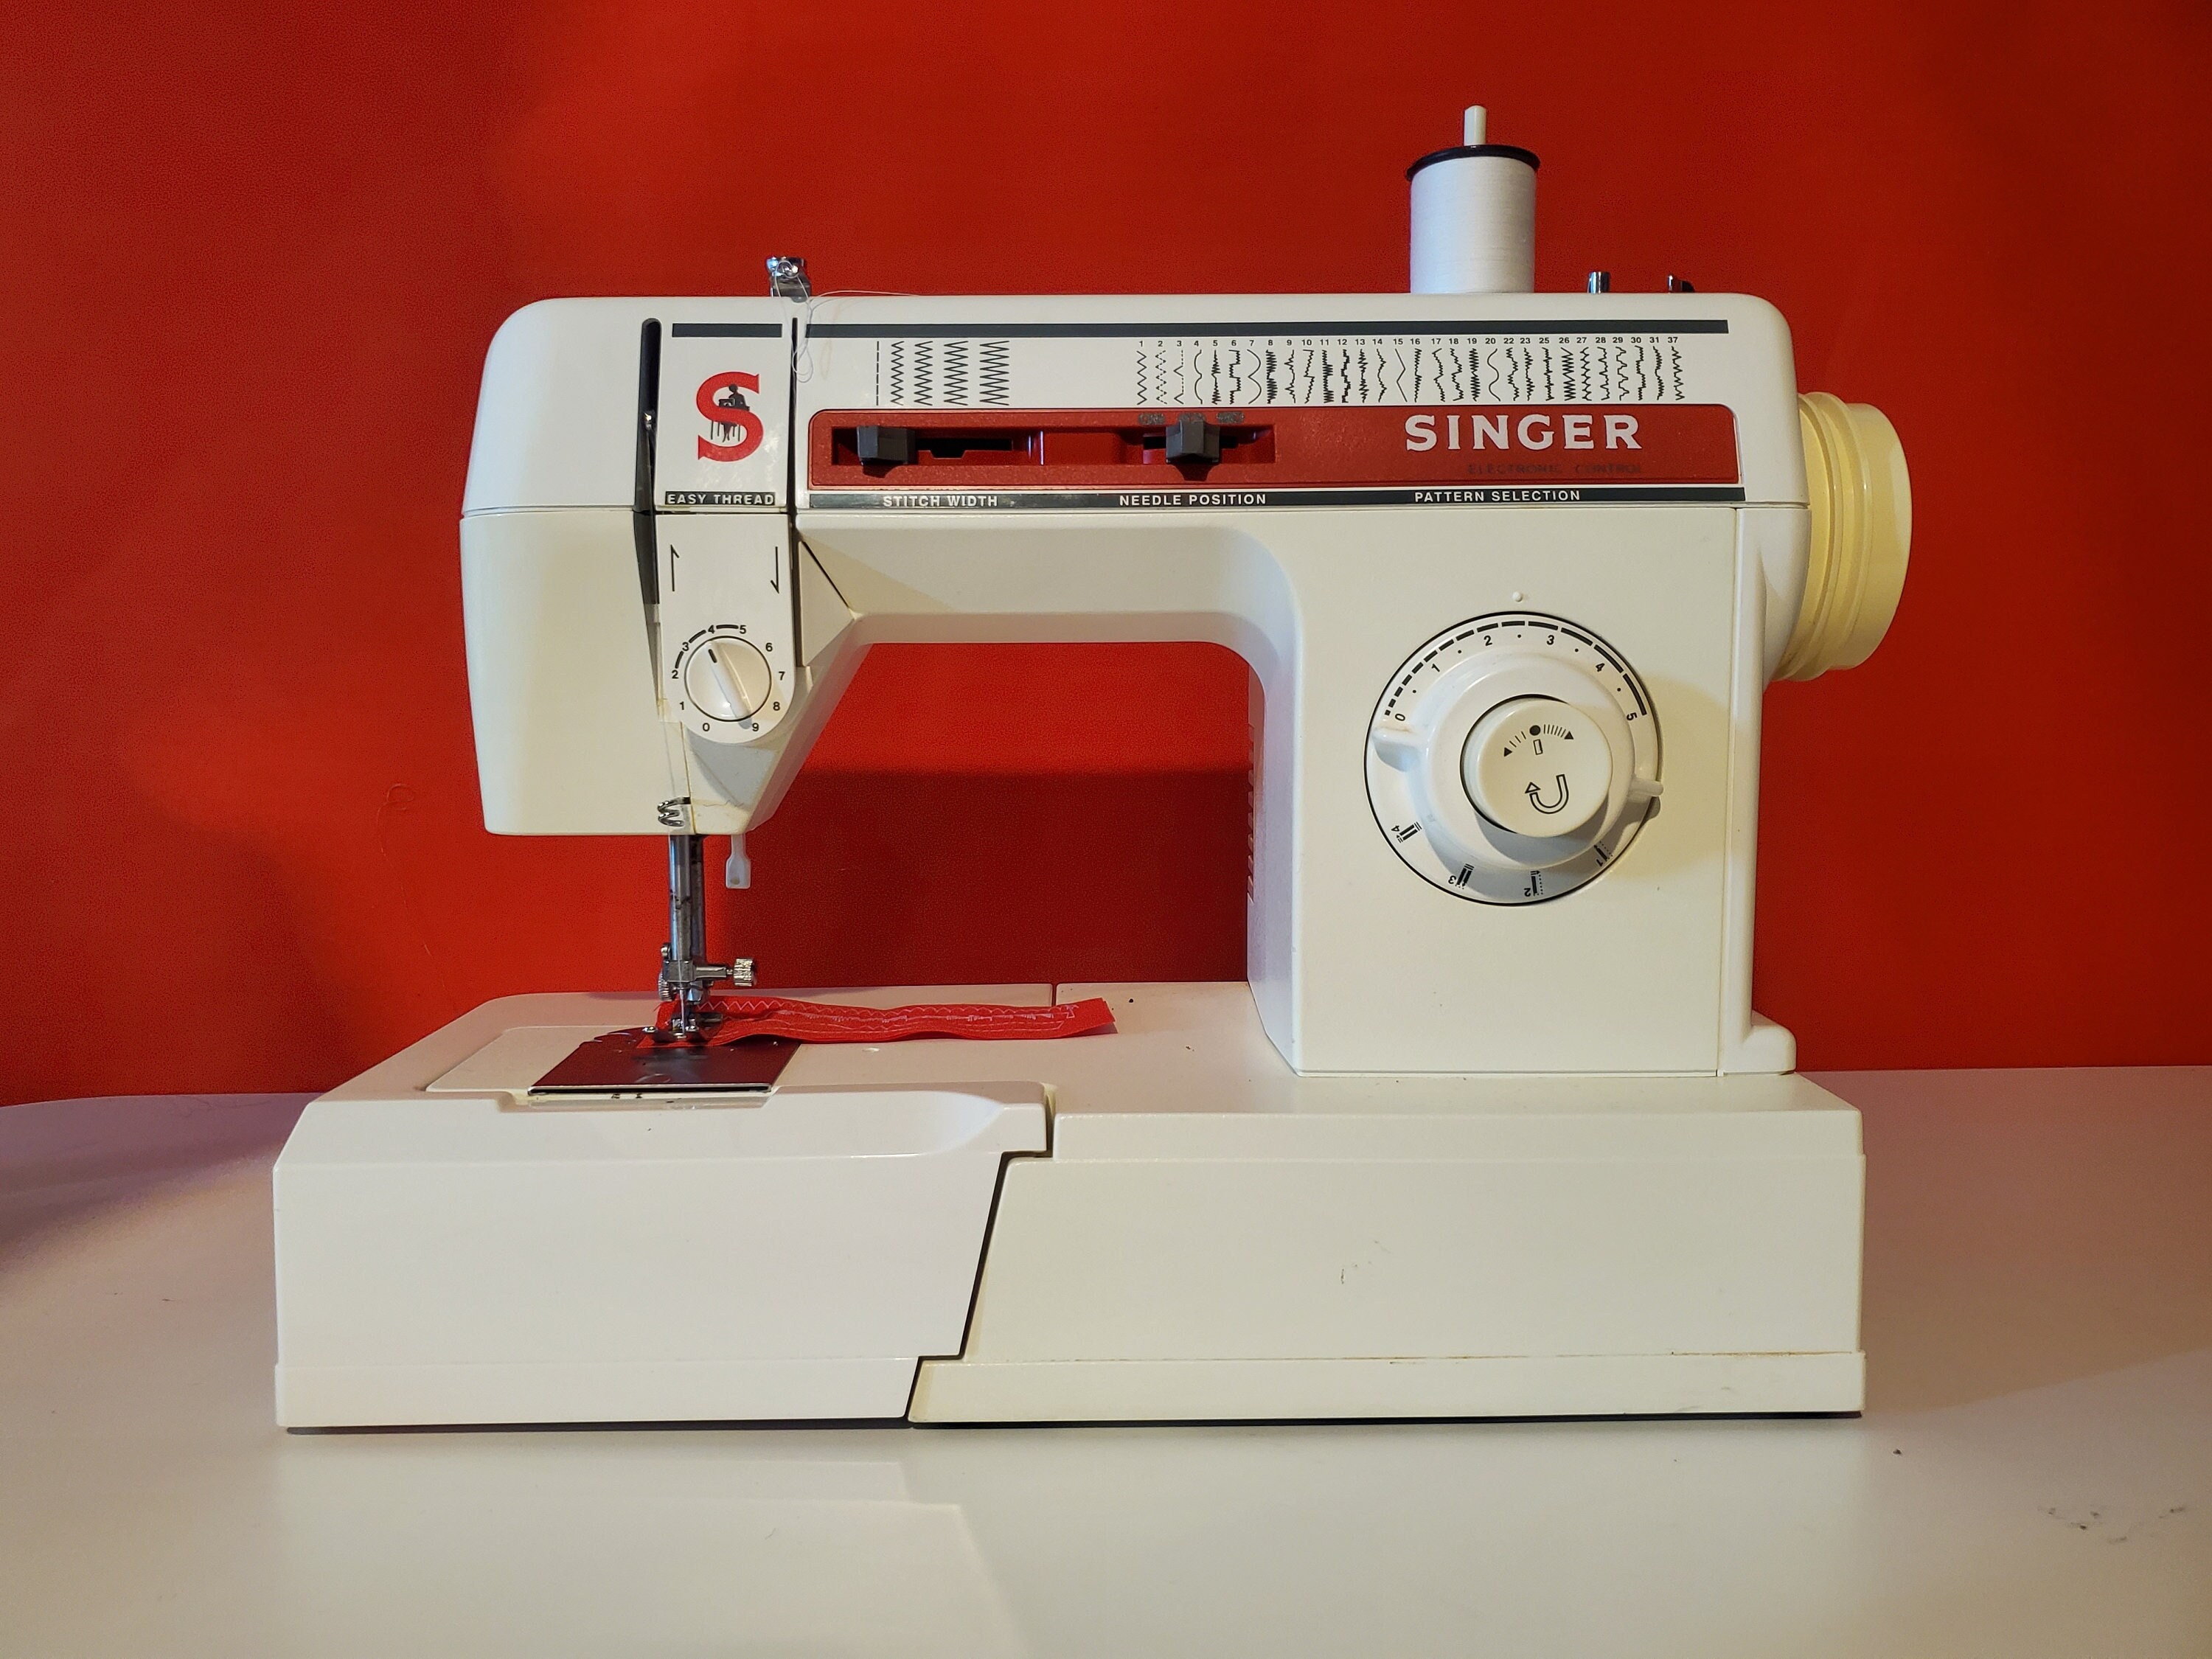 SINGER Stylist Electric Sewing Machine at Tractor Supply Co.